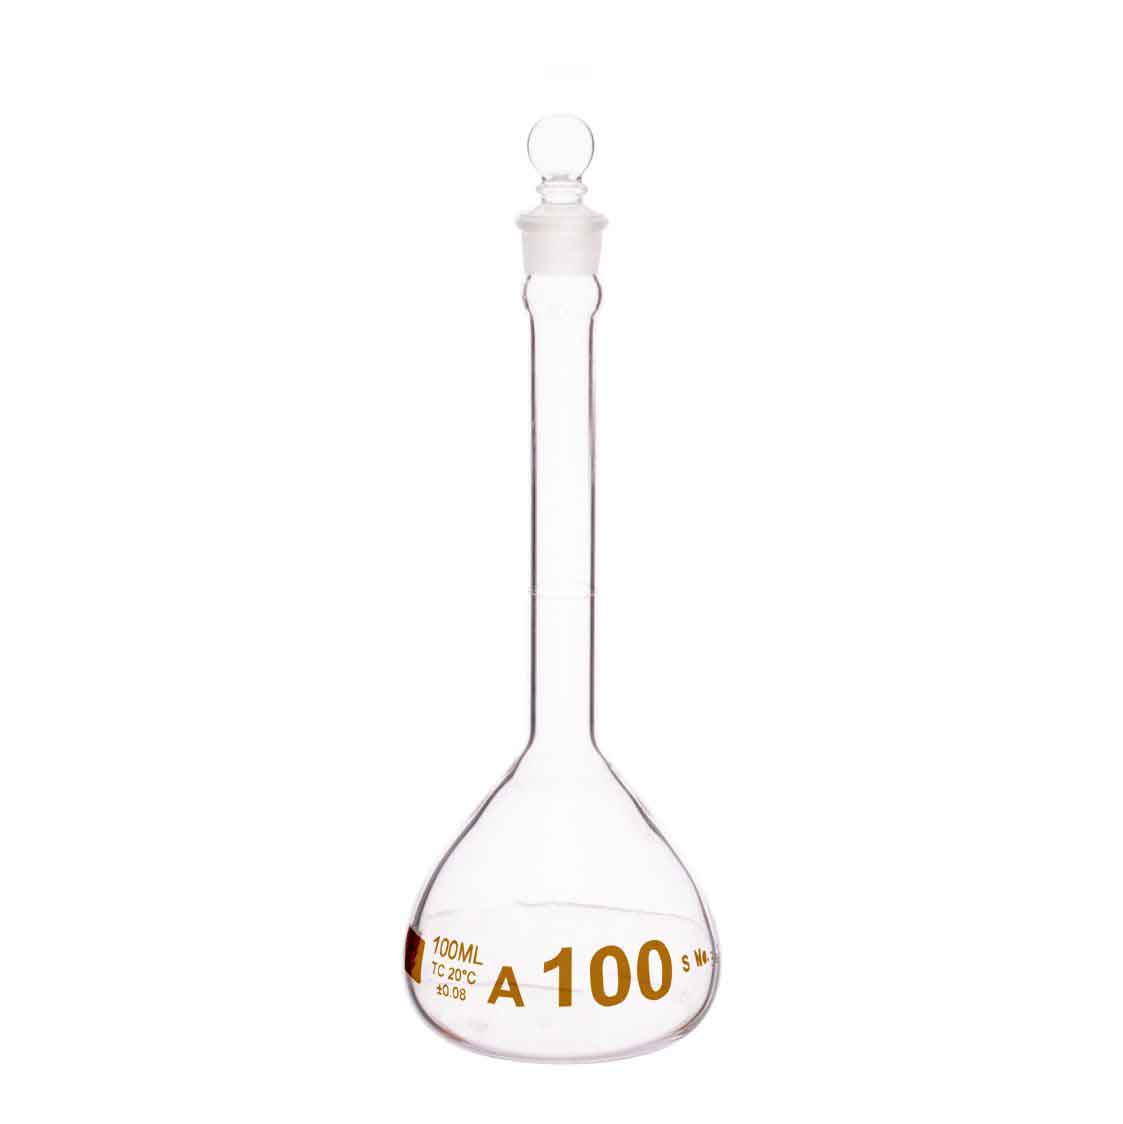 Borosilicate Glass ASTM Volumetric Flask with Glass Stopper, 500